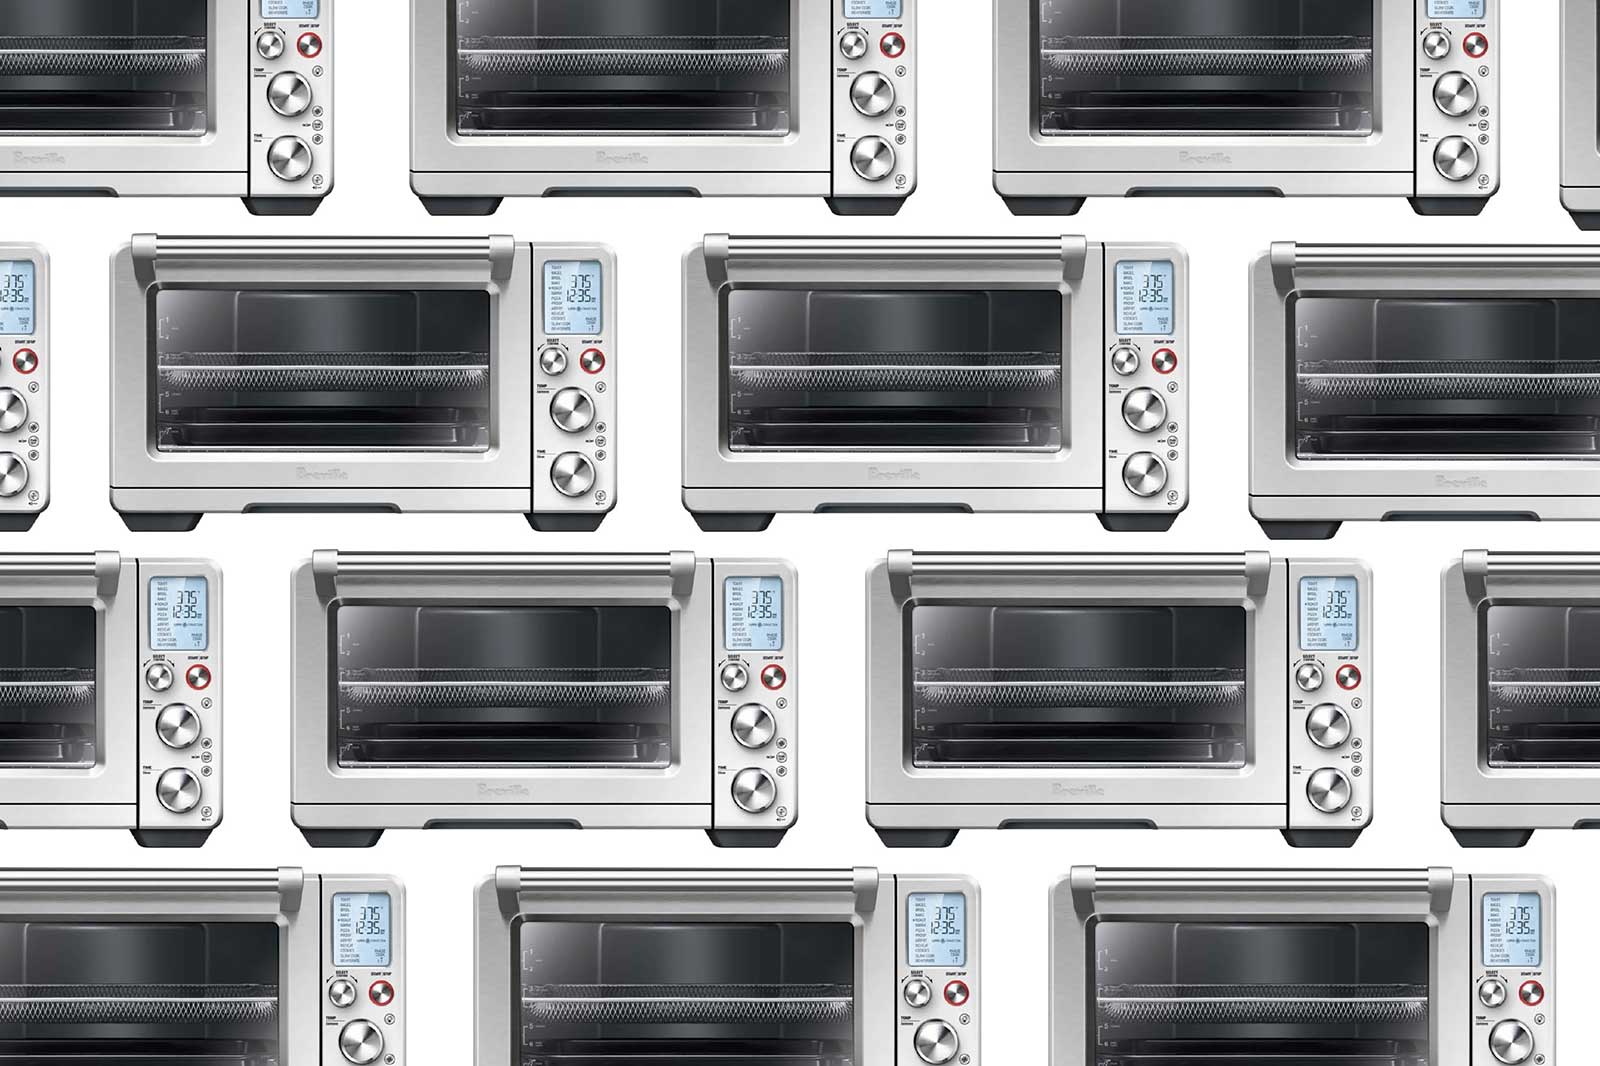 The best smart ovens and air fryers are at their lowest prices of the year before Black Friday at Amazon